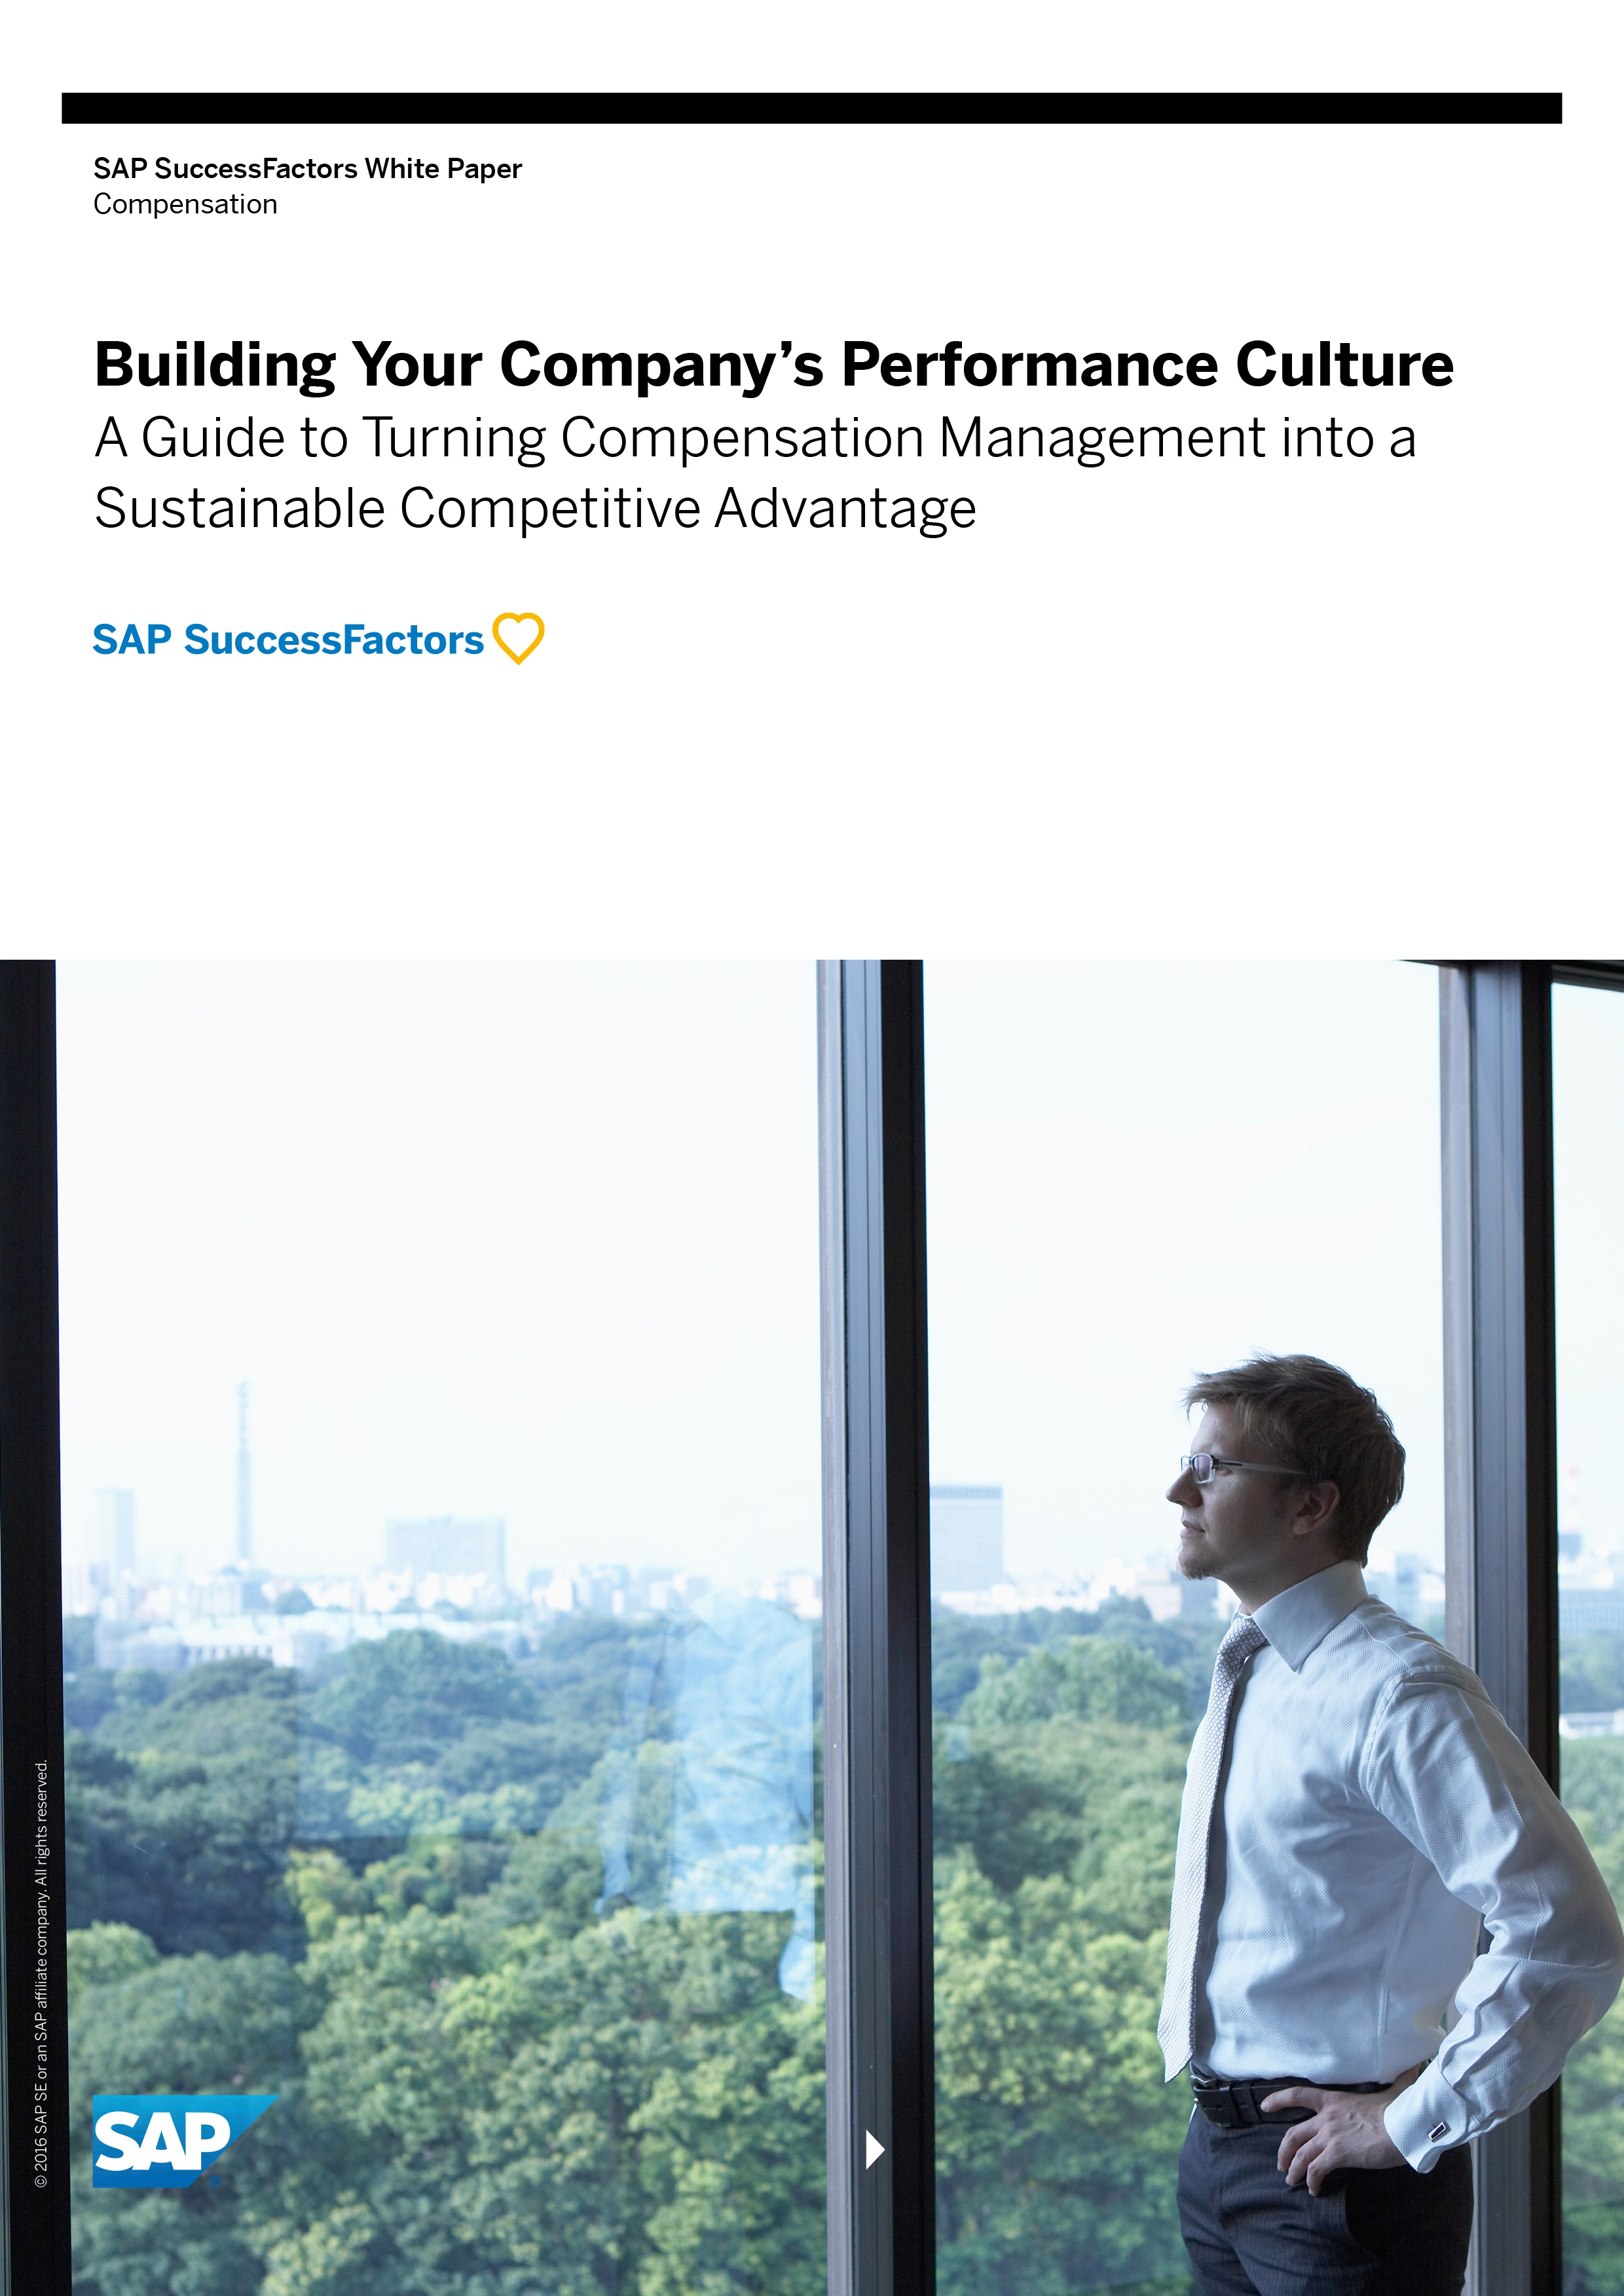 Building your company's performance culture